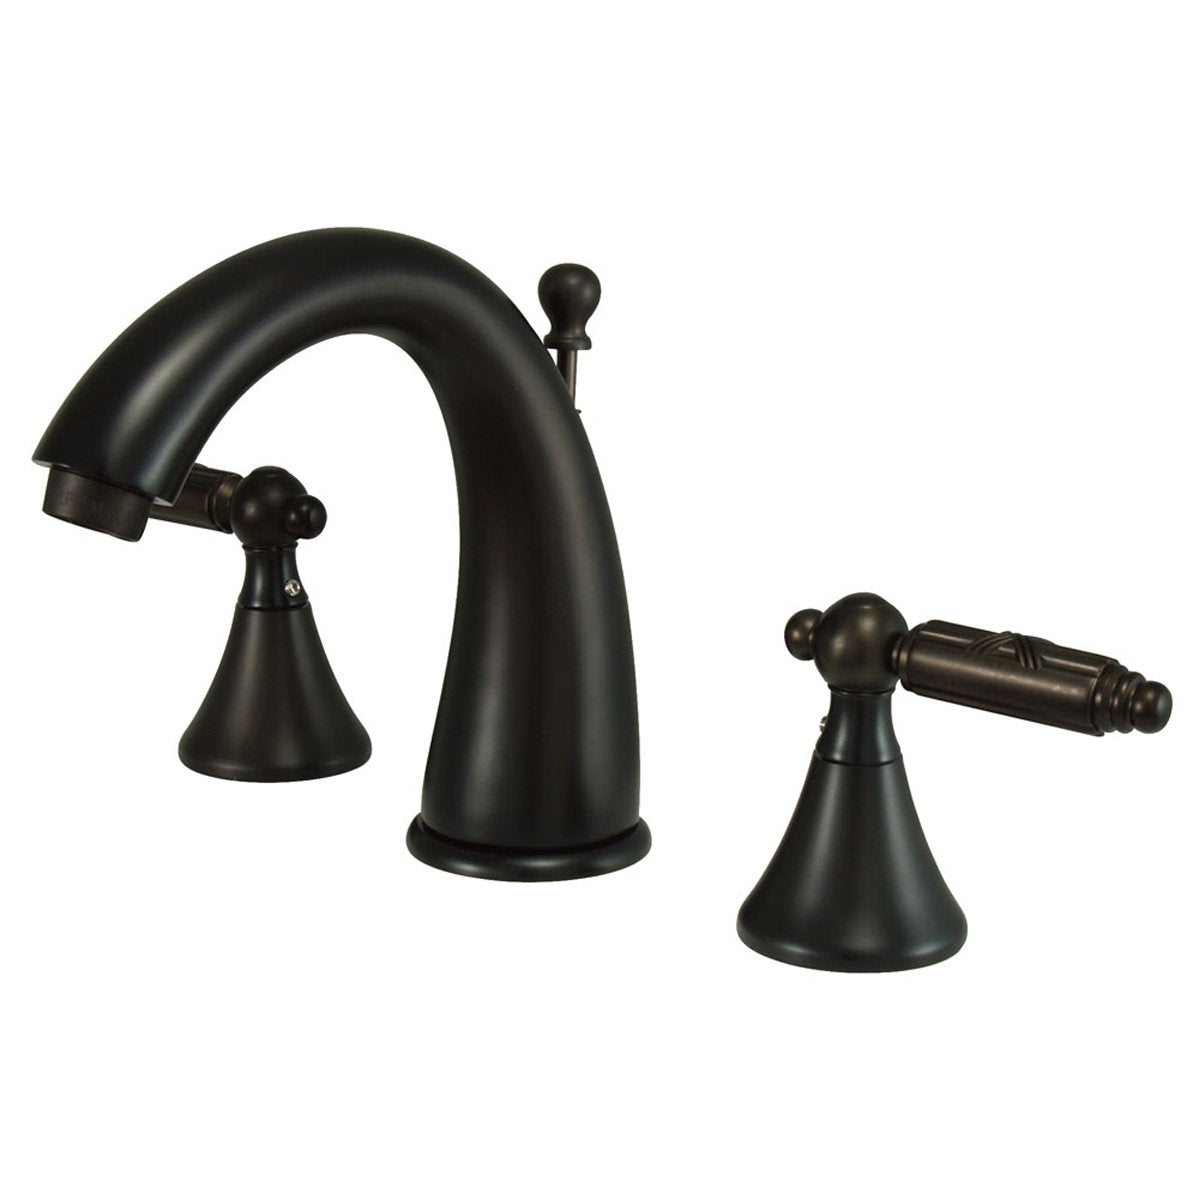 Kingston Brass Elinvar 8" to 16" Widespread Lavatory Faucet with Brass Pop-up and Two Handle-Bathroom Faucets-Free Shipping-Directsinks.